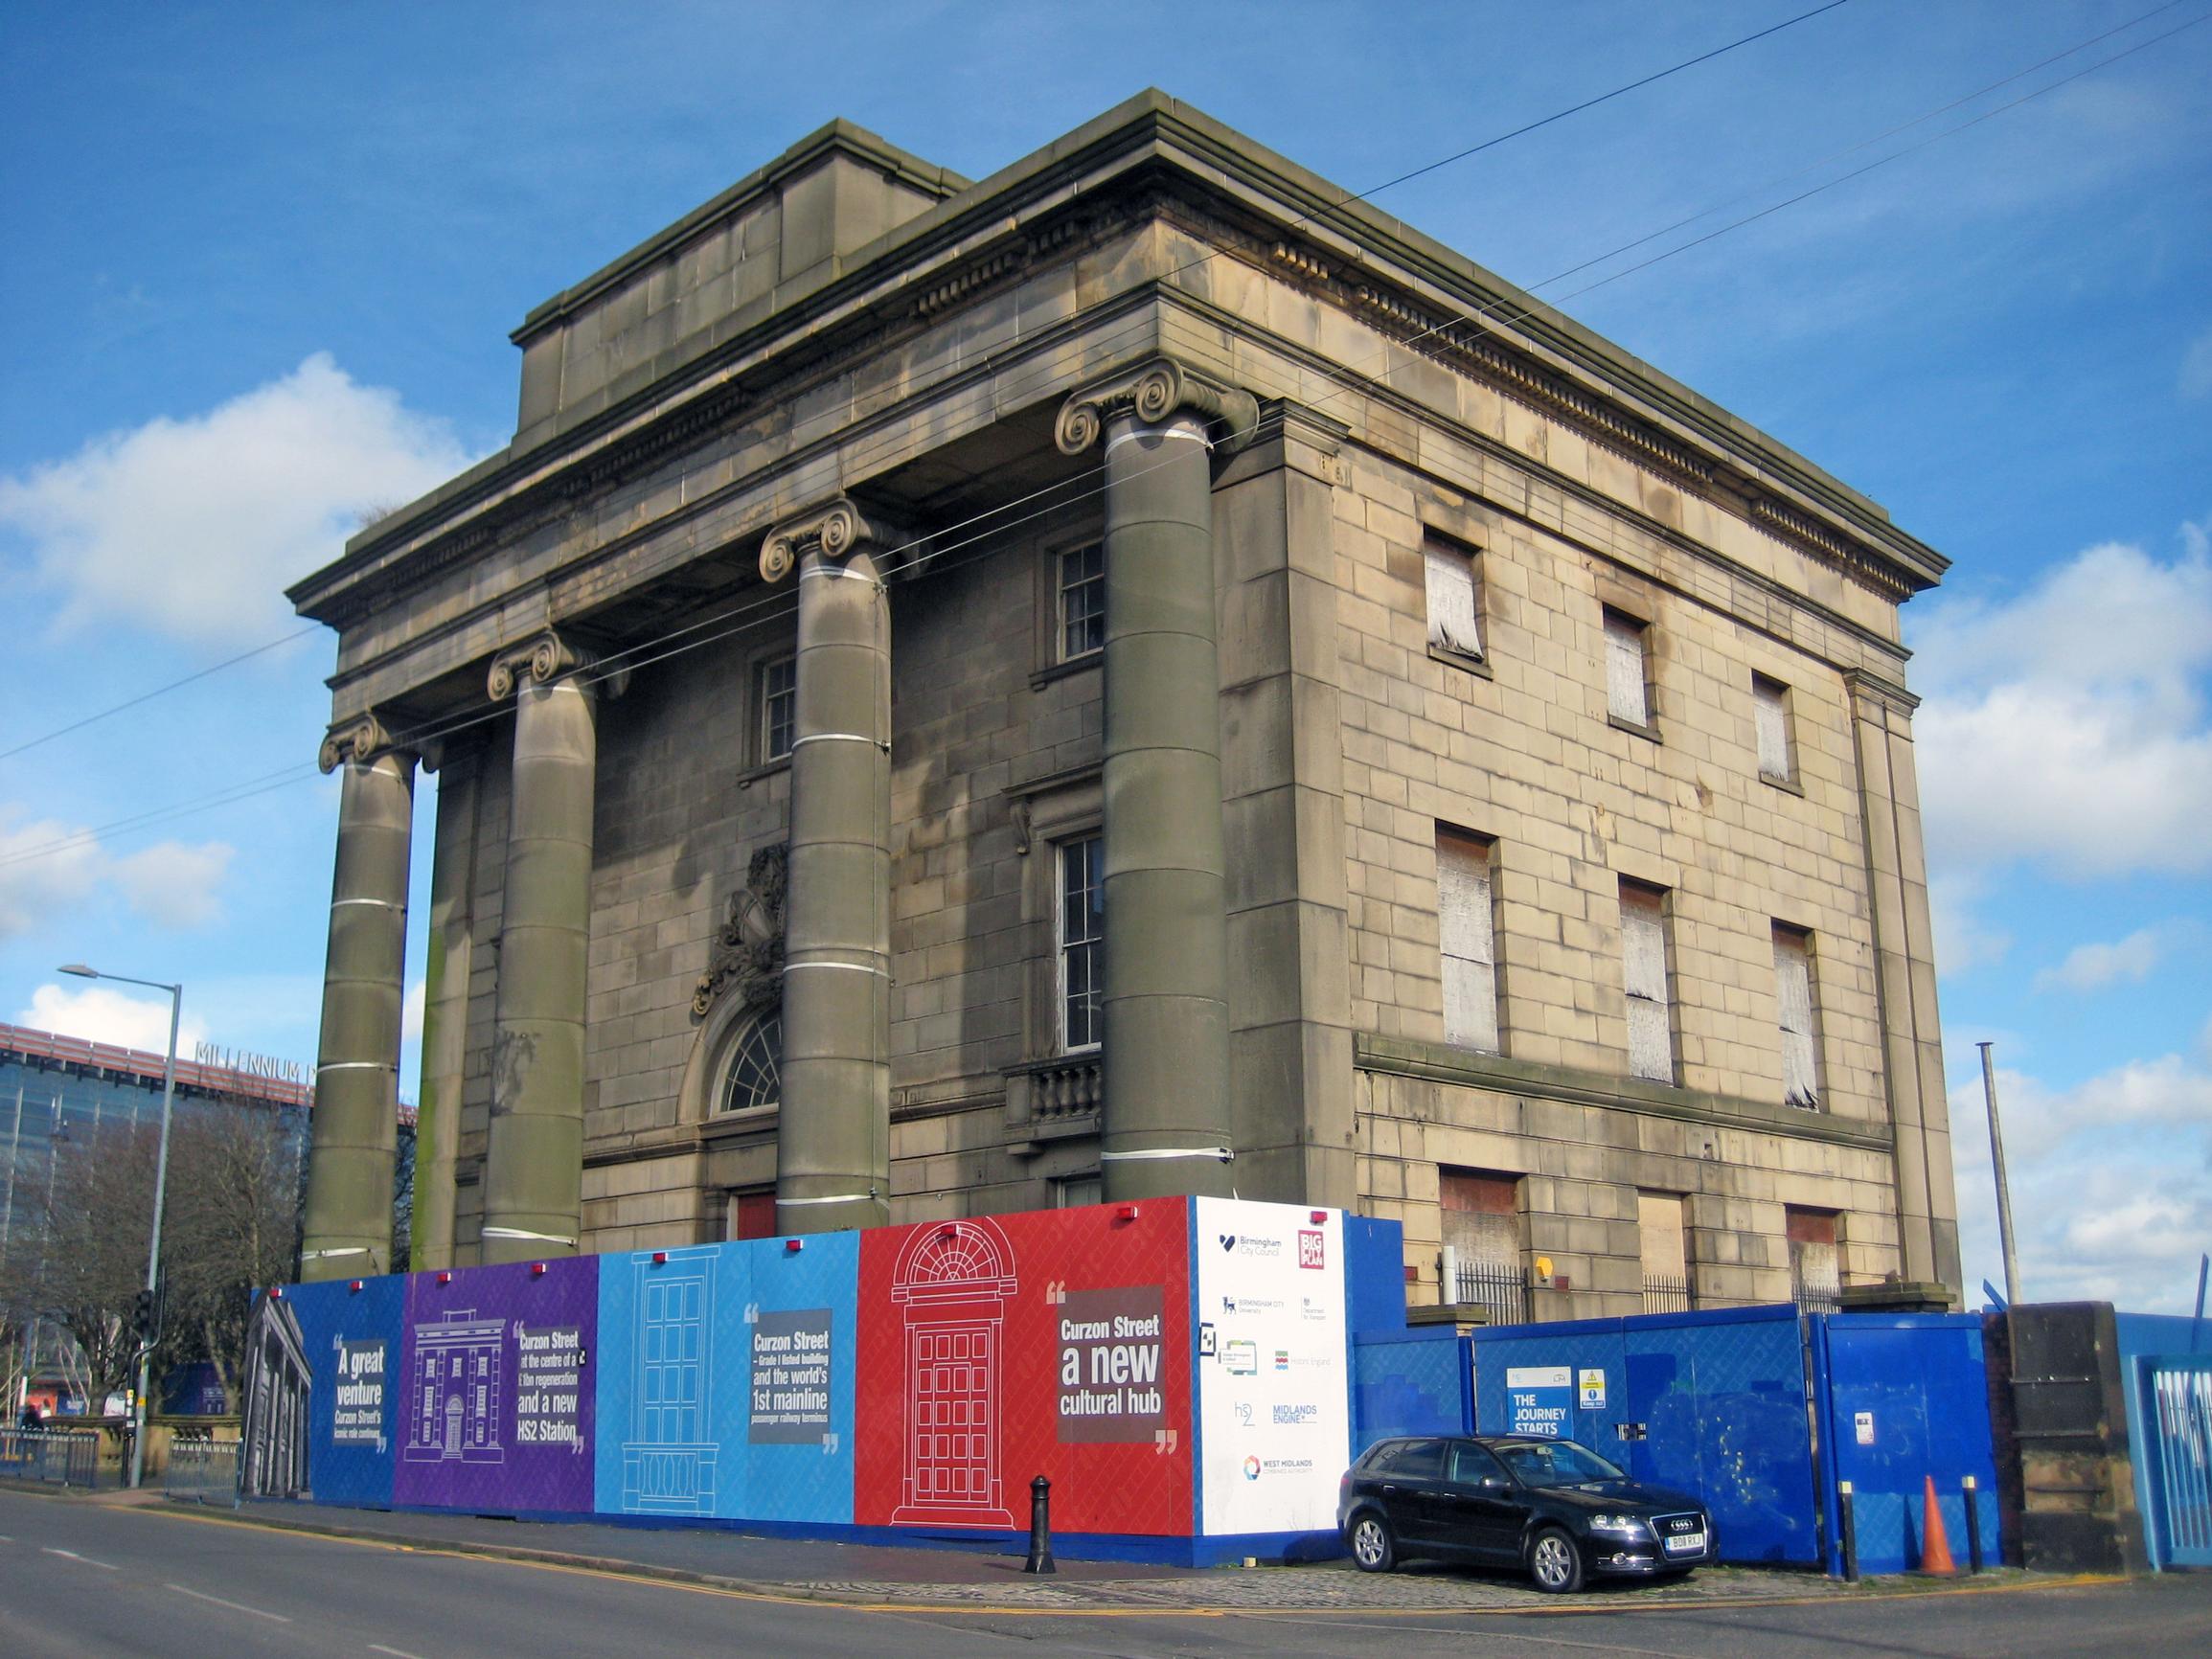 Birmingham Curzon Street: construction work can now begin following the Government issuing the notice to proceed to the main works contractors